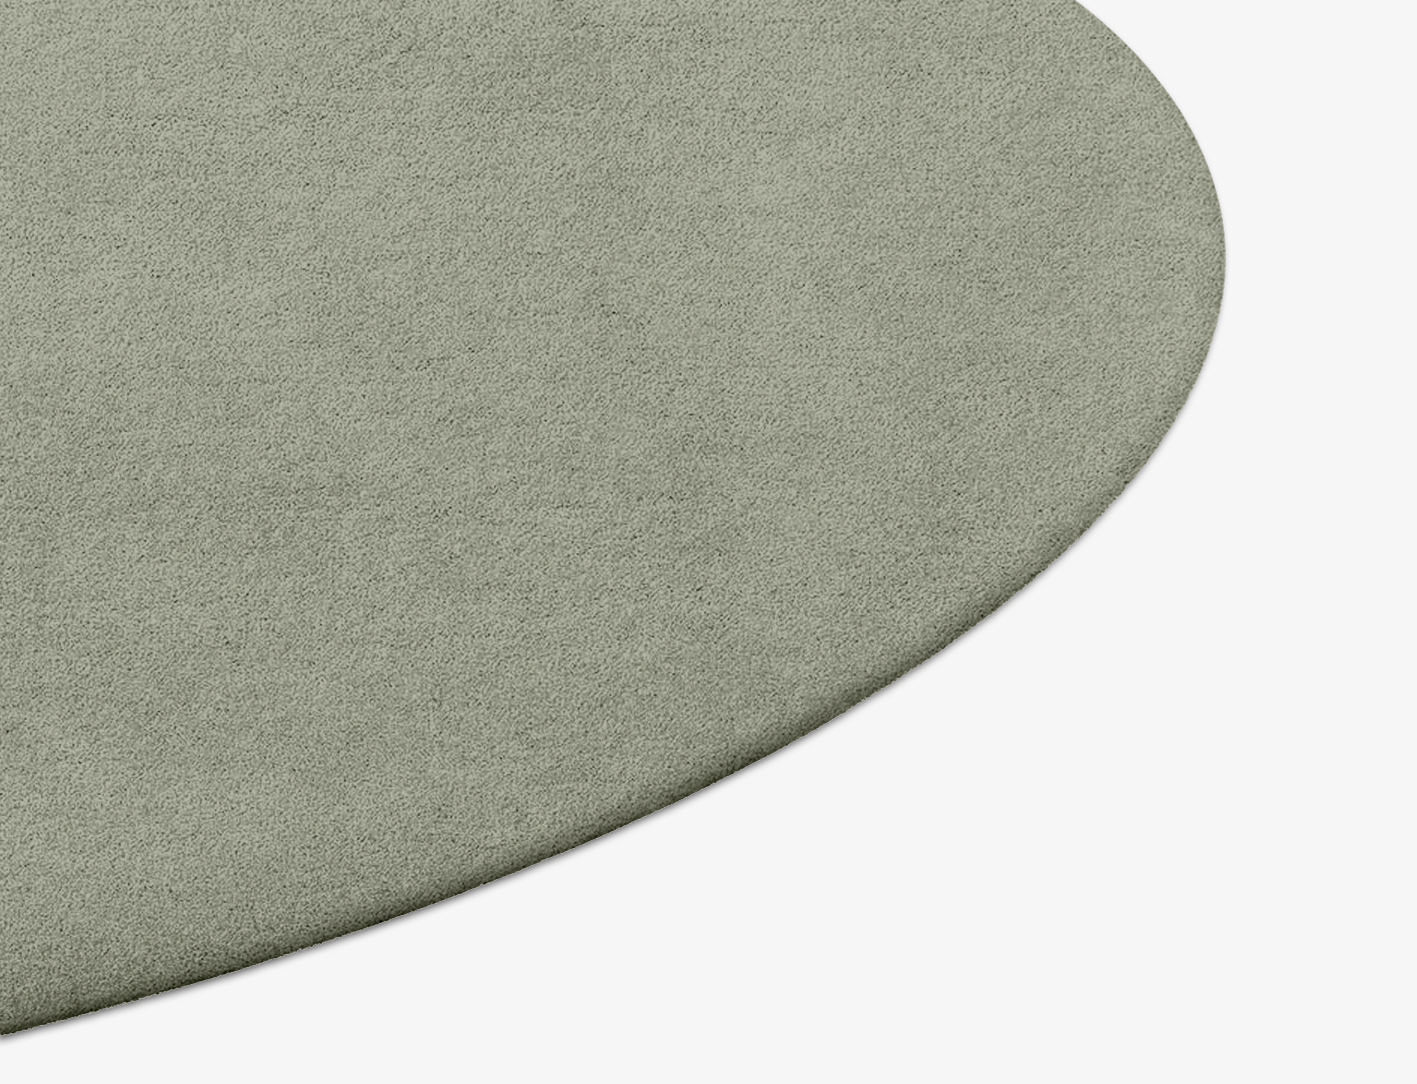 RA-CA11 Solid Colors Round Hand Tufted Pure Wool Custom Rug by Rug Artisan